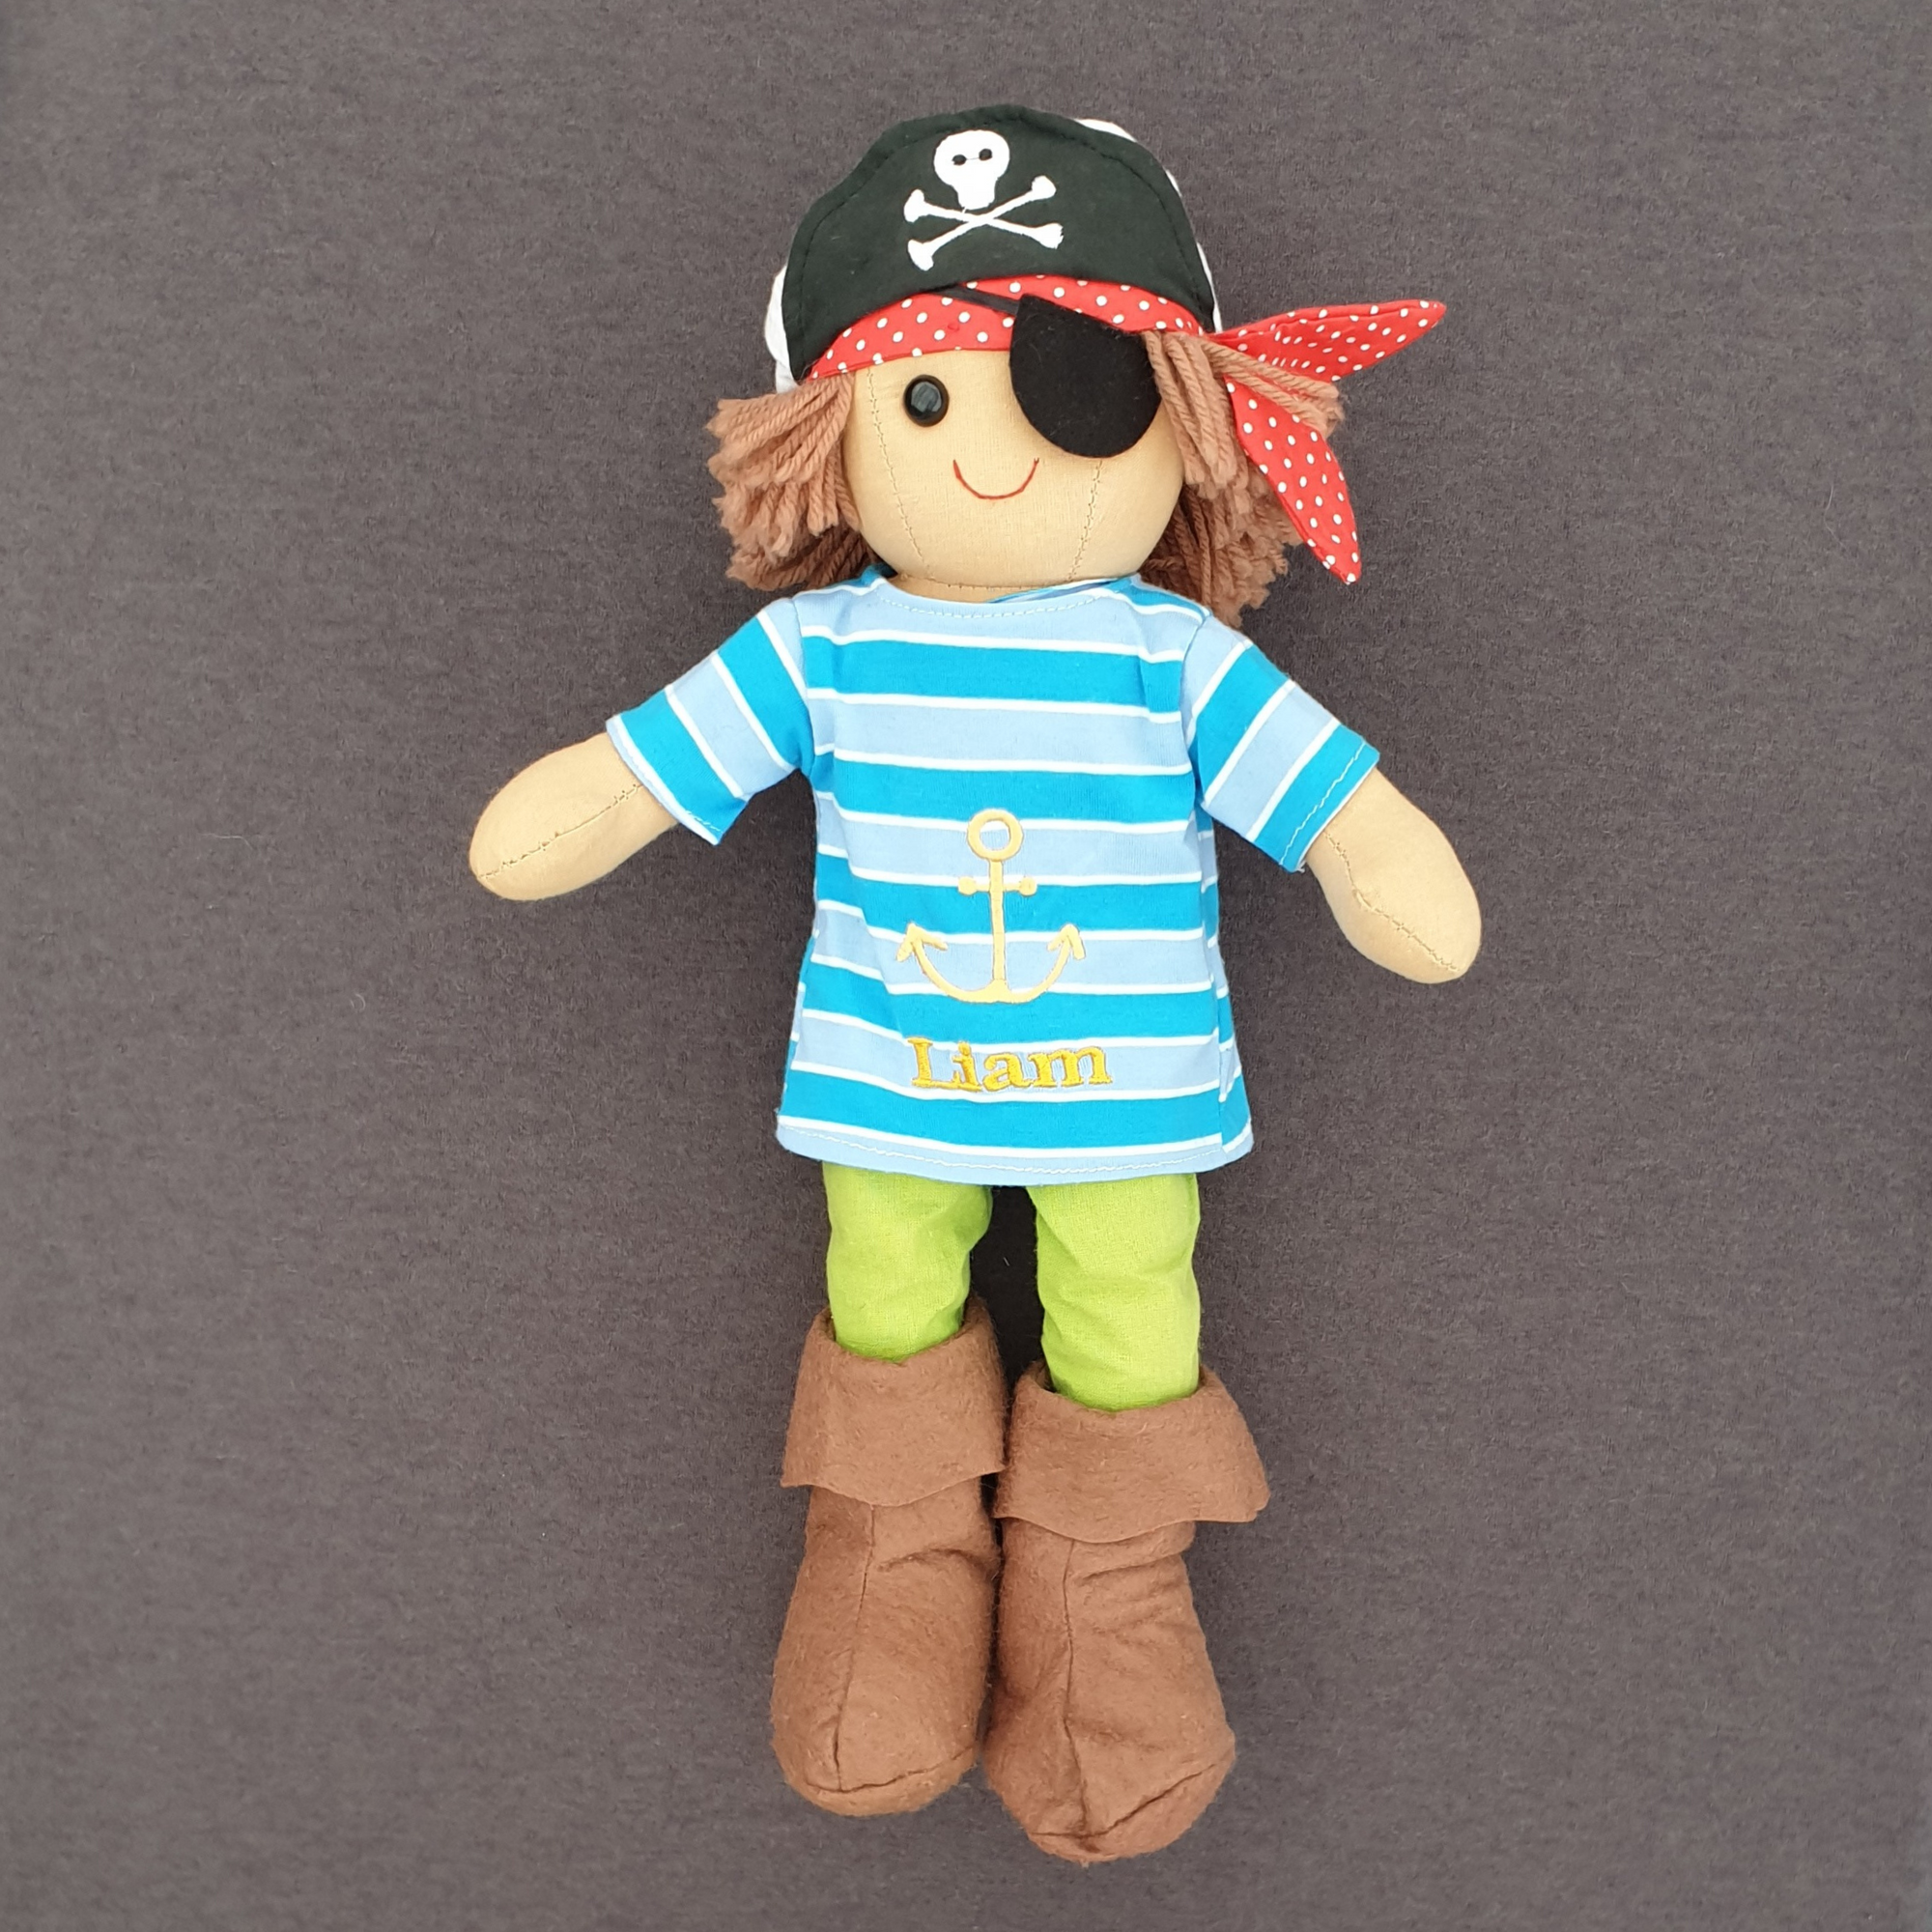 Personalised pirate rag doll. Our pirate rag doll is made from cotton and suitable from birth. He is wearing a blue striped t-shirt which can be personalised with a name of your choice. He also has a pirate hat, eye patch and soft brown boots.